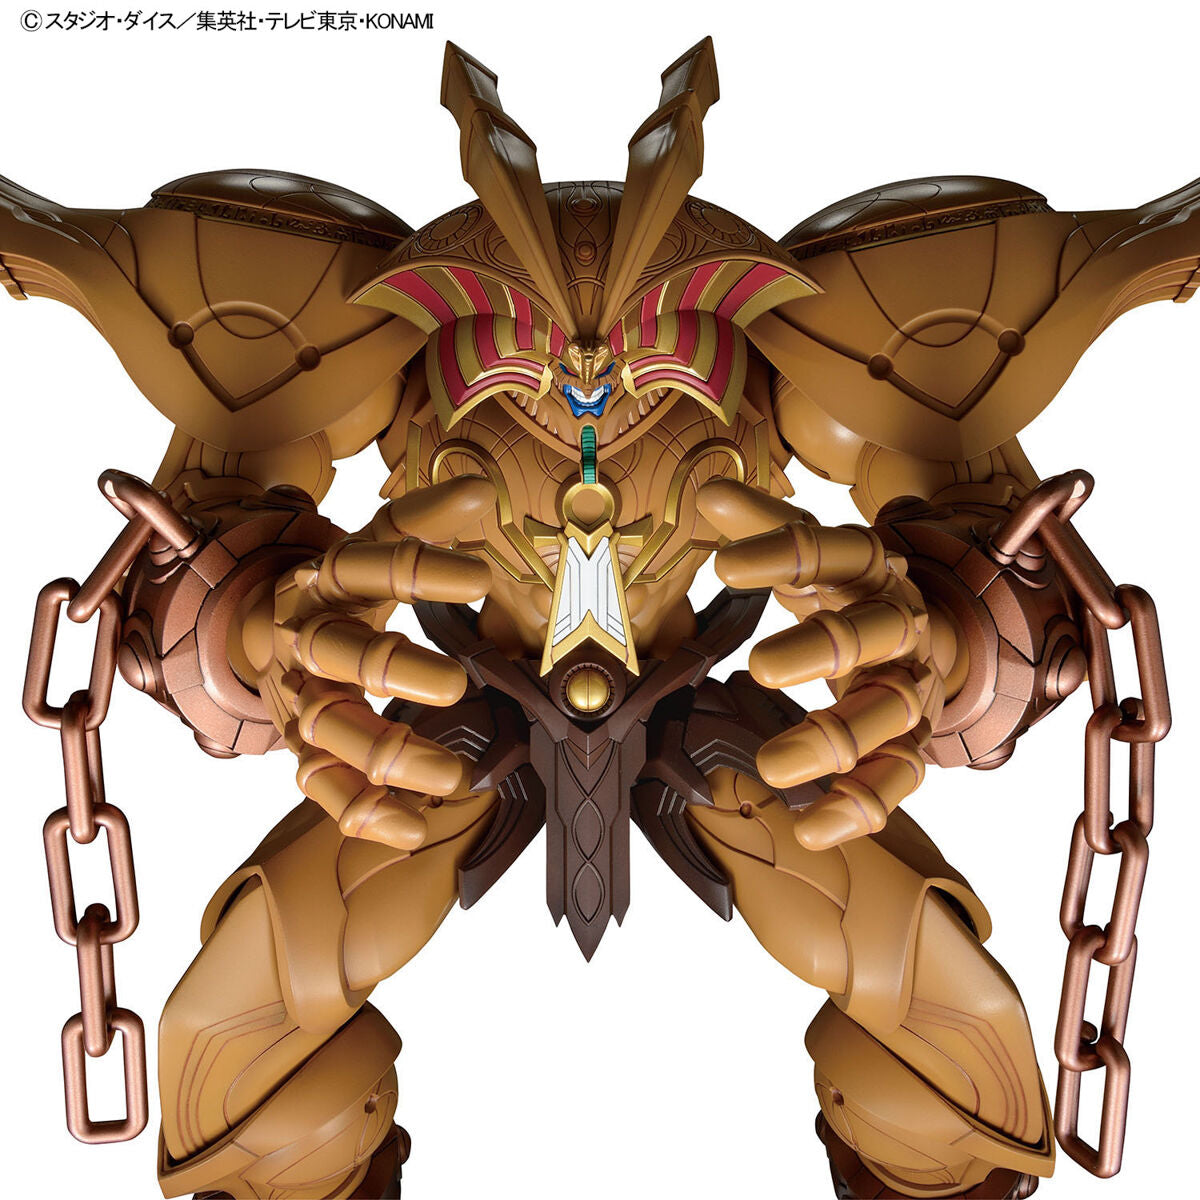 Image alt text: Yu-Gi-Oh! -Duel Monsters - The Legendary Exodia Incarnate - Figure-rise Standard Amplified Model Kit, Summoned God Exodia brought to life in impressive scale, Nippon Figures